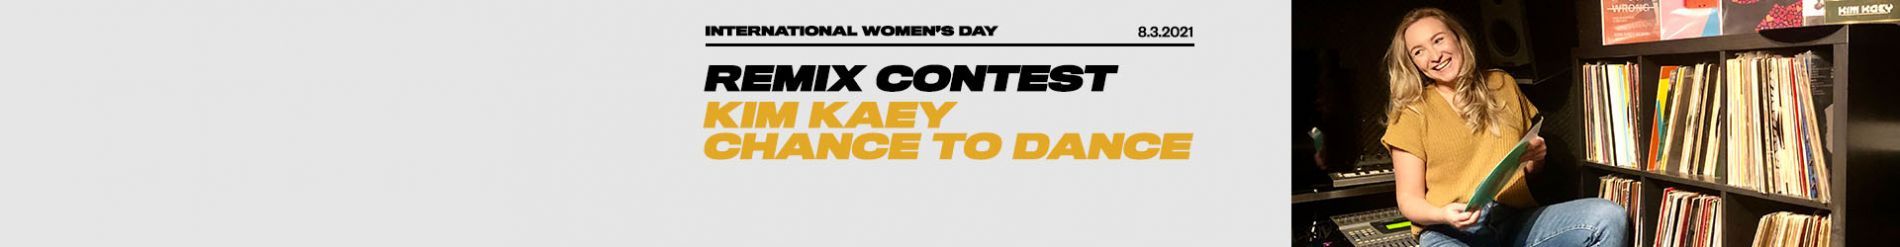 CELEBRATING INTERNATIONAL WOMEN'S DAY: REMIX "KIM KAEY - CHANCE TO DANCE" AND WIN A SPECIAL PRIZE PACKAGE!